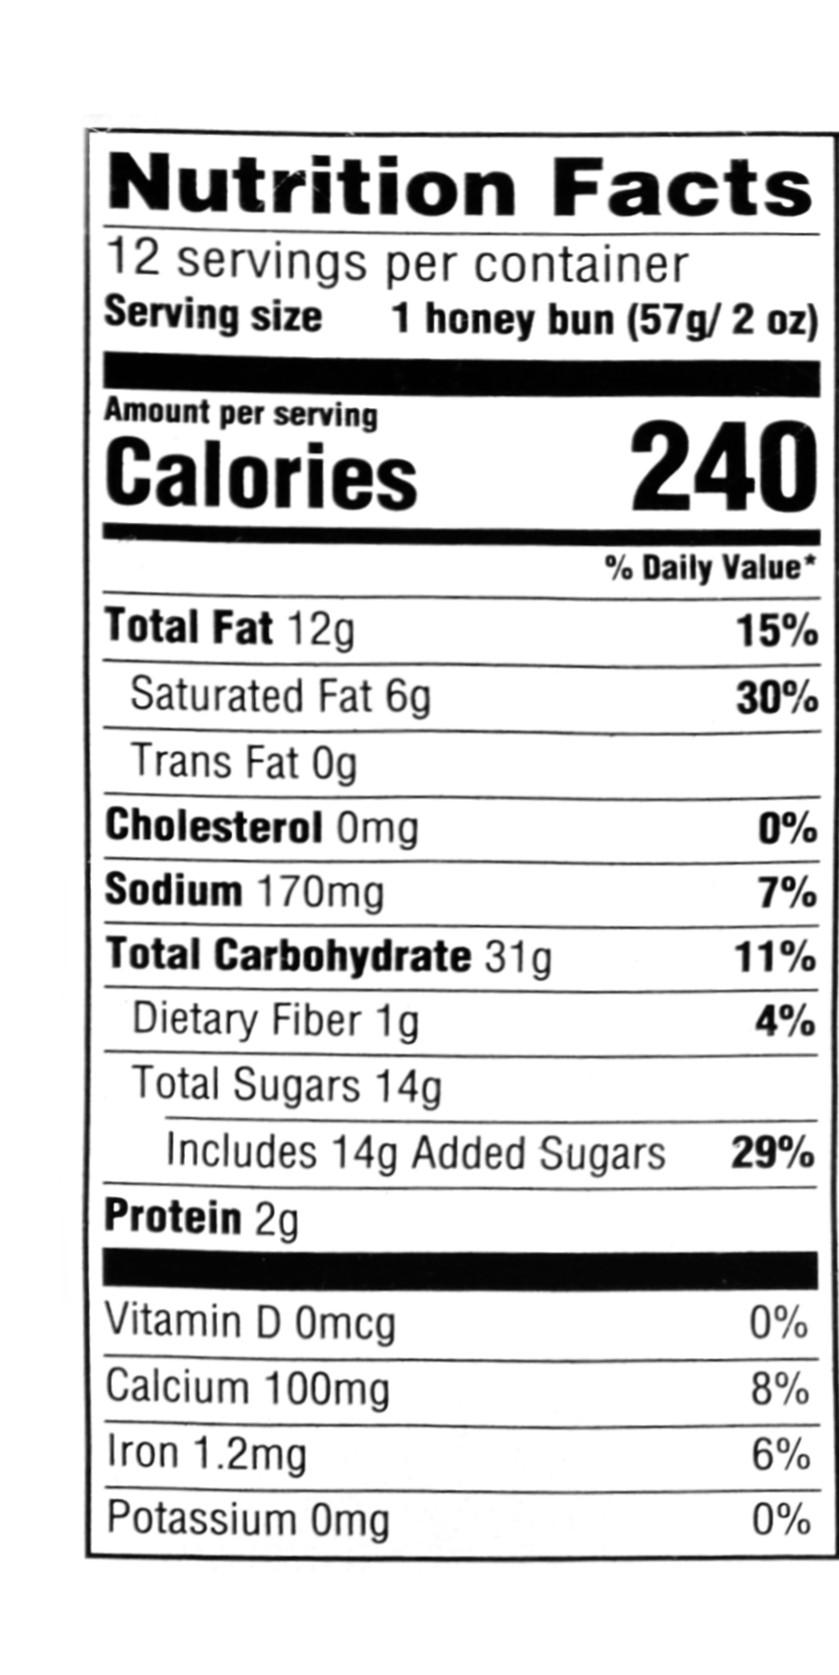 If Joe Ate A Whole Container Of Honey Buns How Many Calories Of Carbohydrate Will He Be Consuming 1